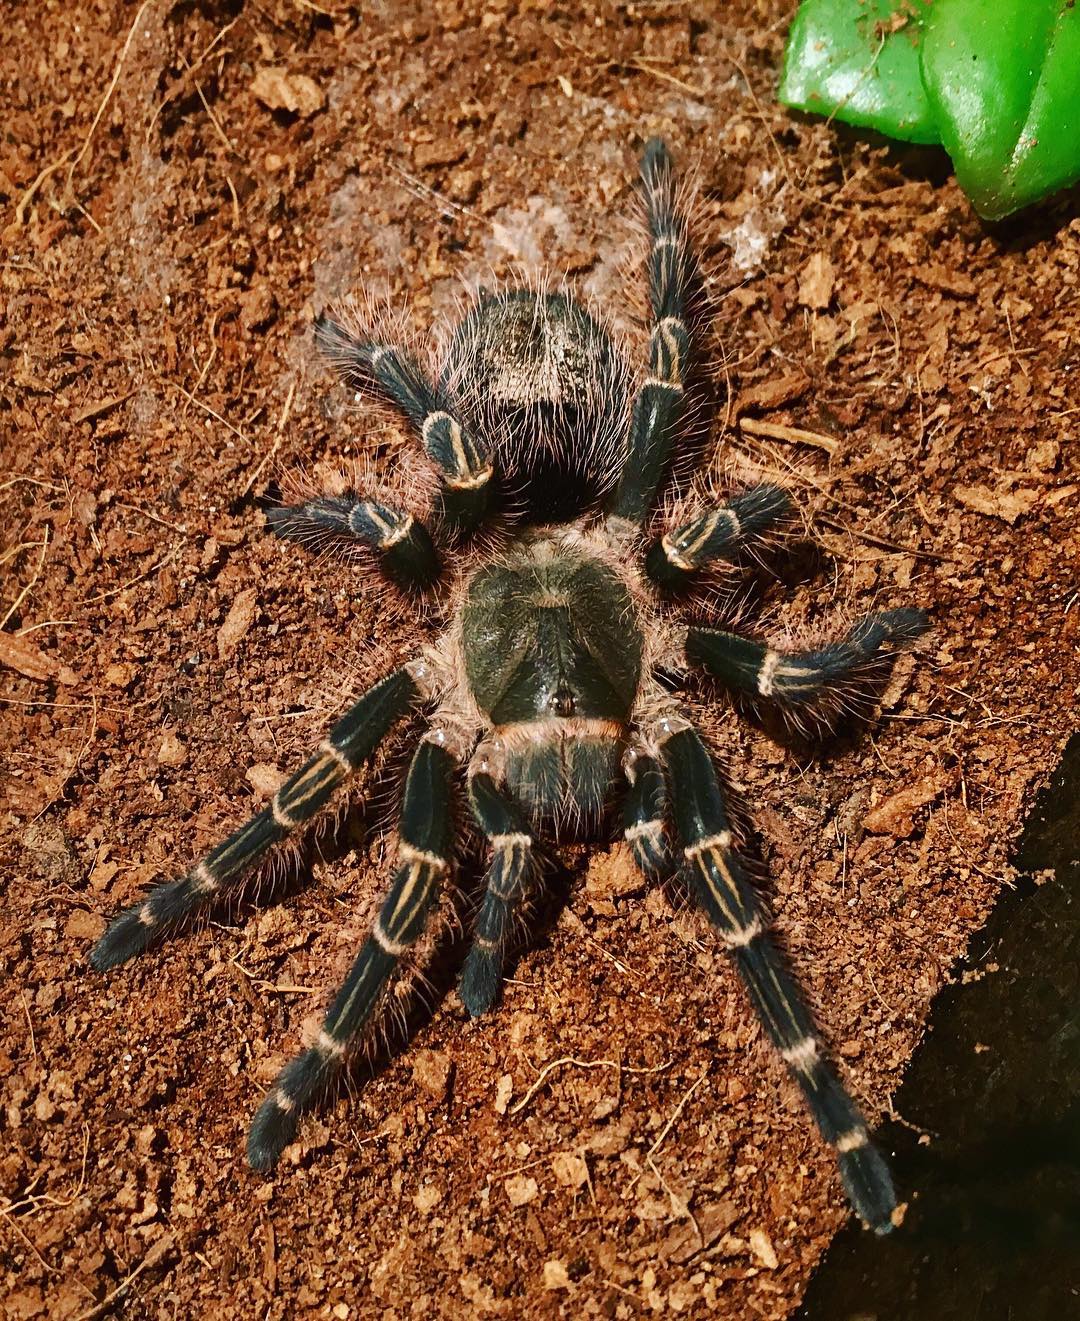 After molting